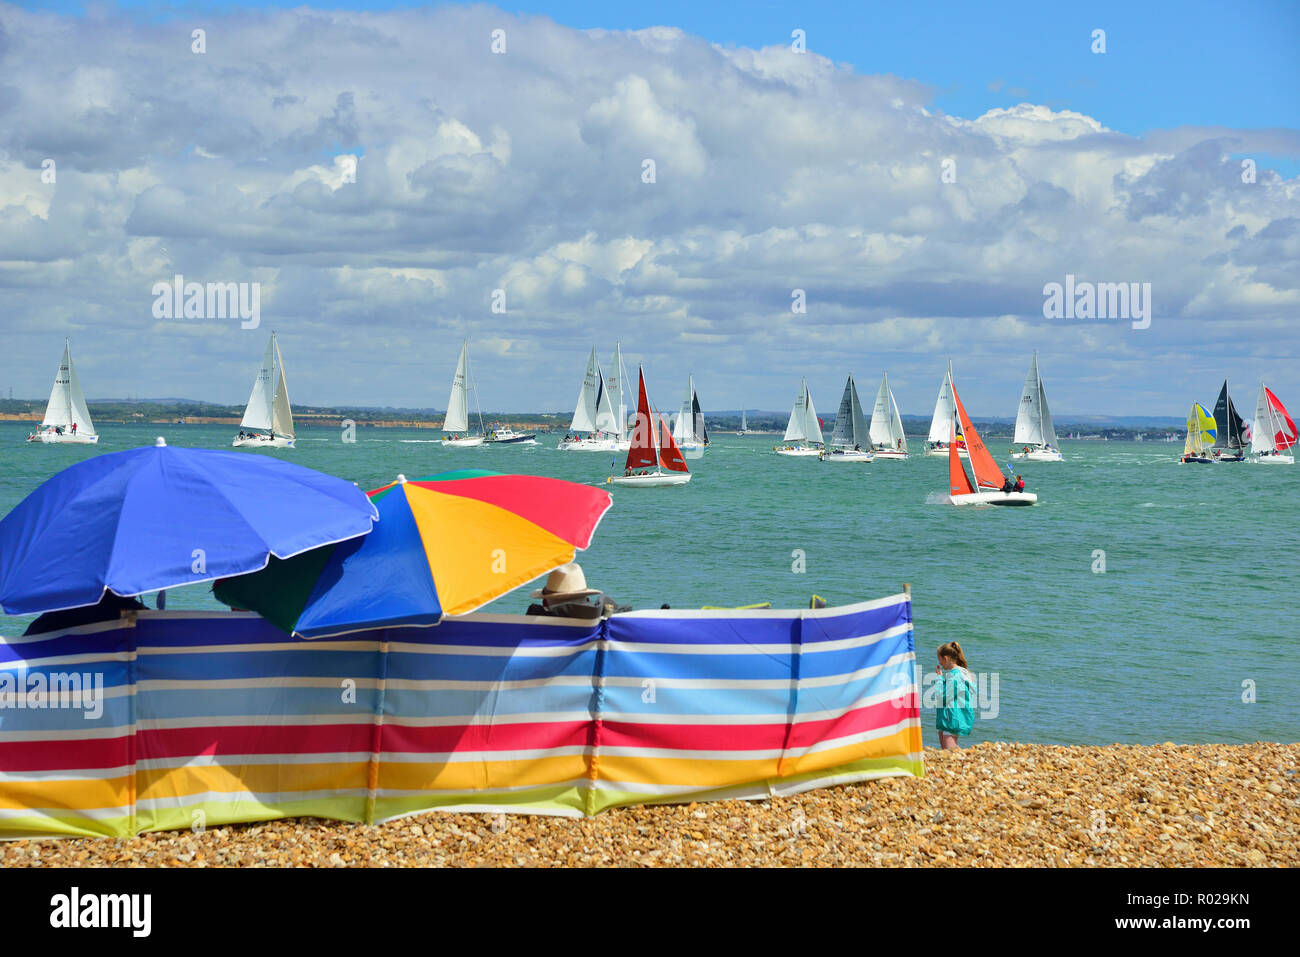 Spectators watch the yacht racing in the Solent during Lendy Cowes Week (2018), Cowes, Isle of Wight, UK Stock Photo